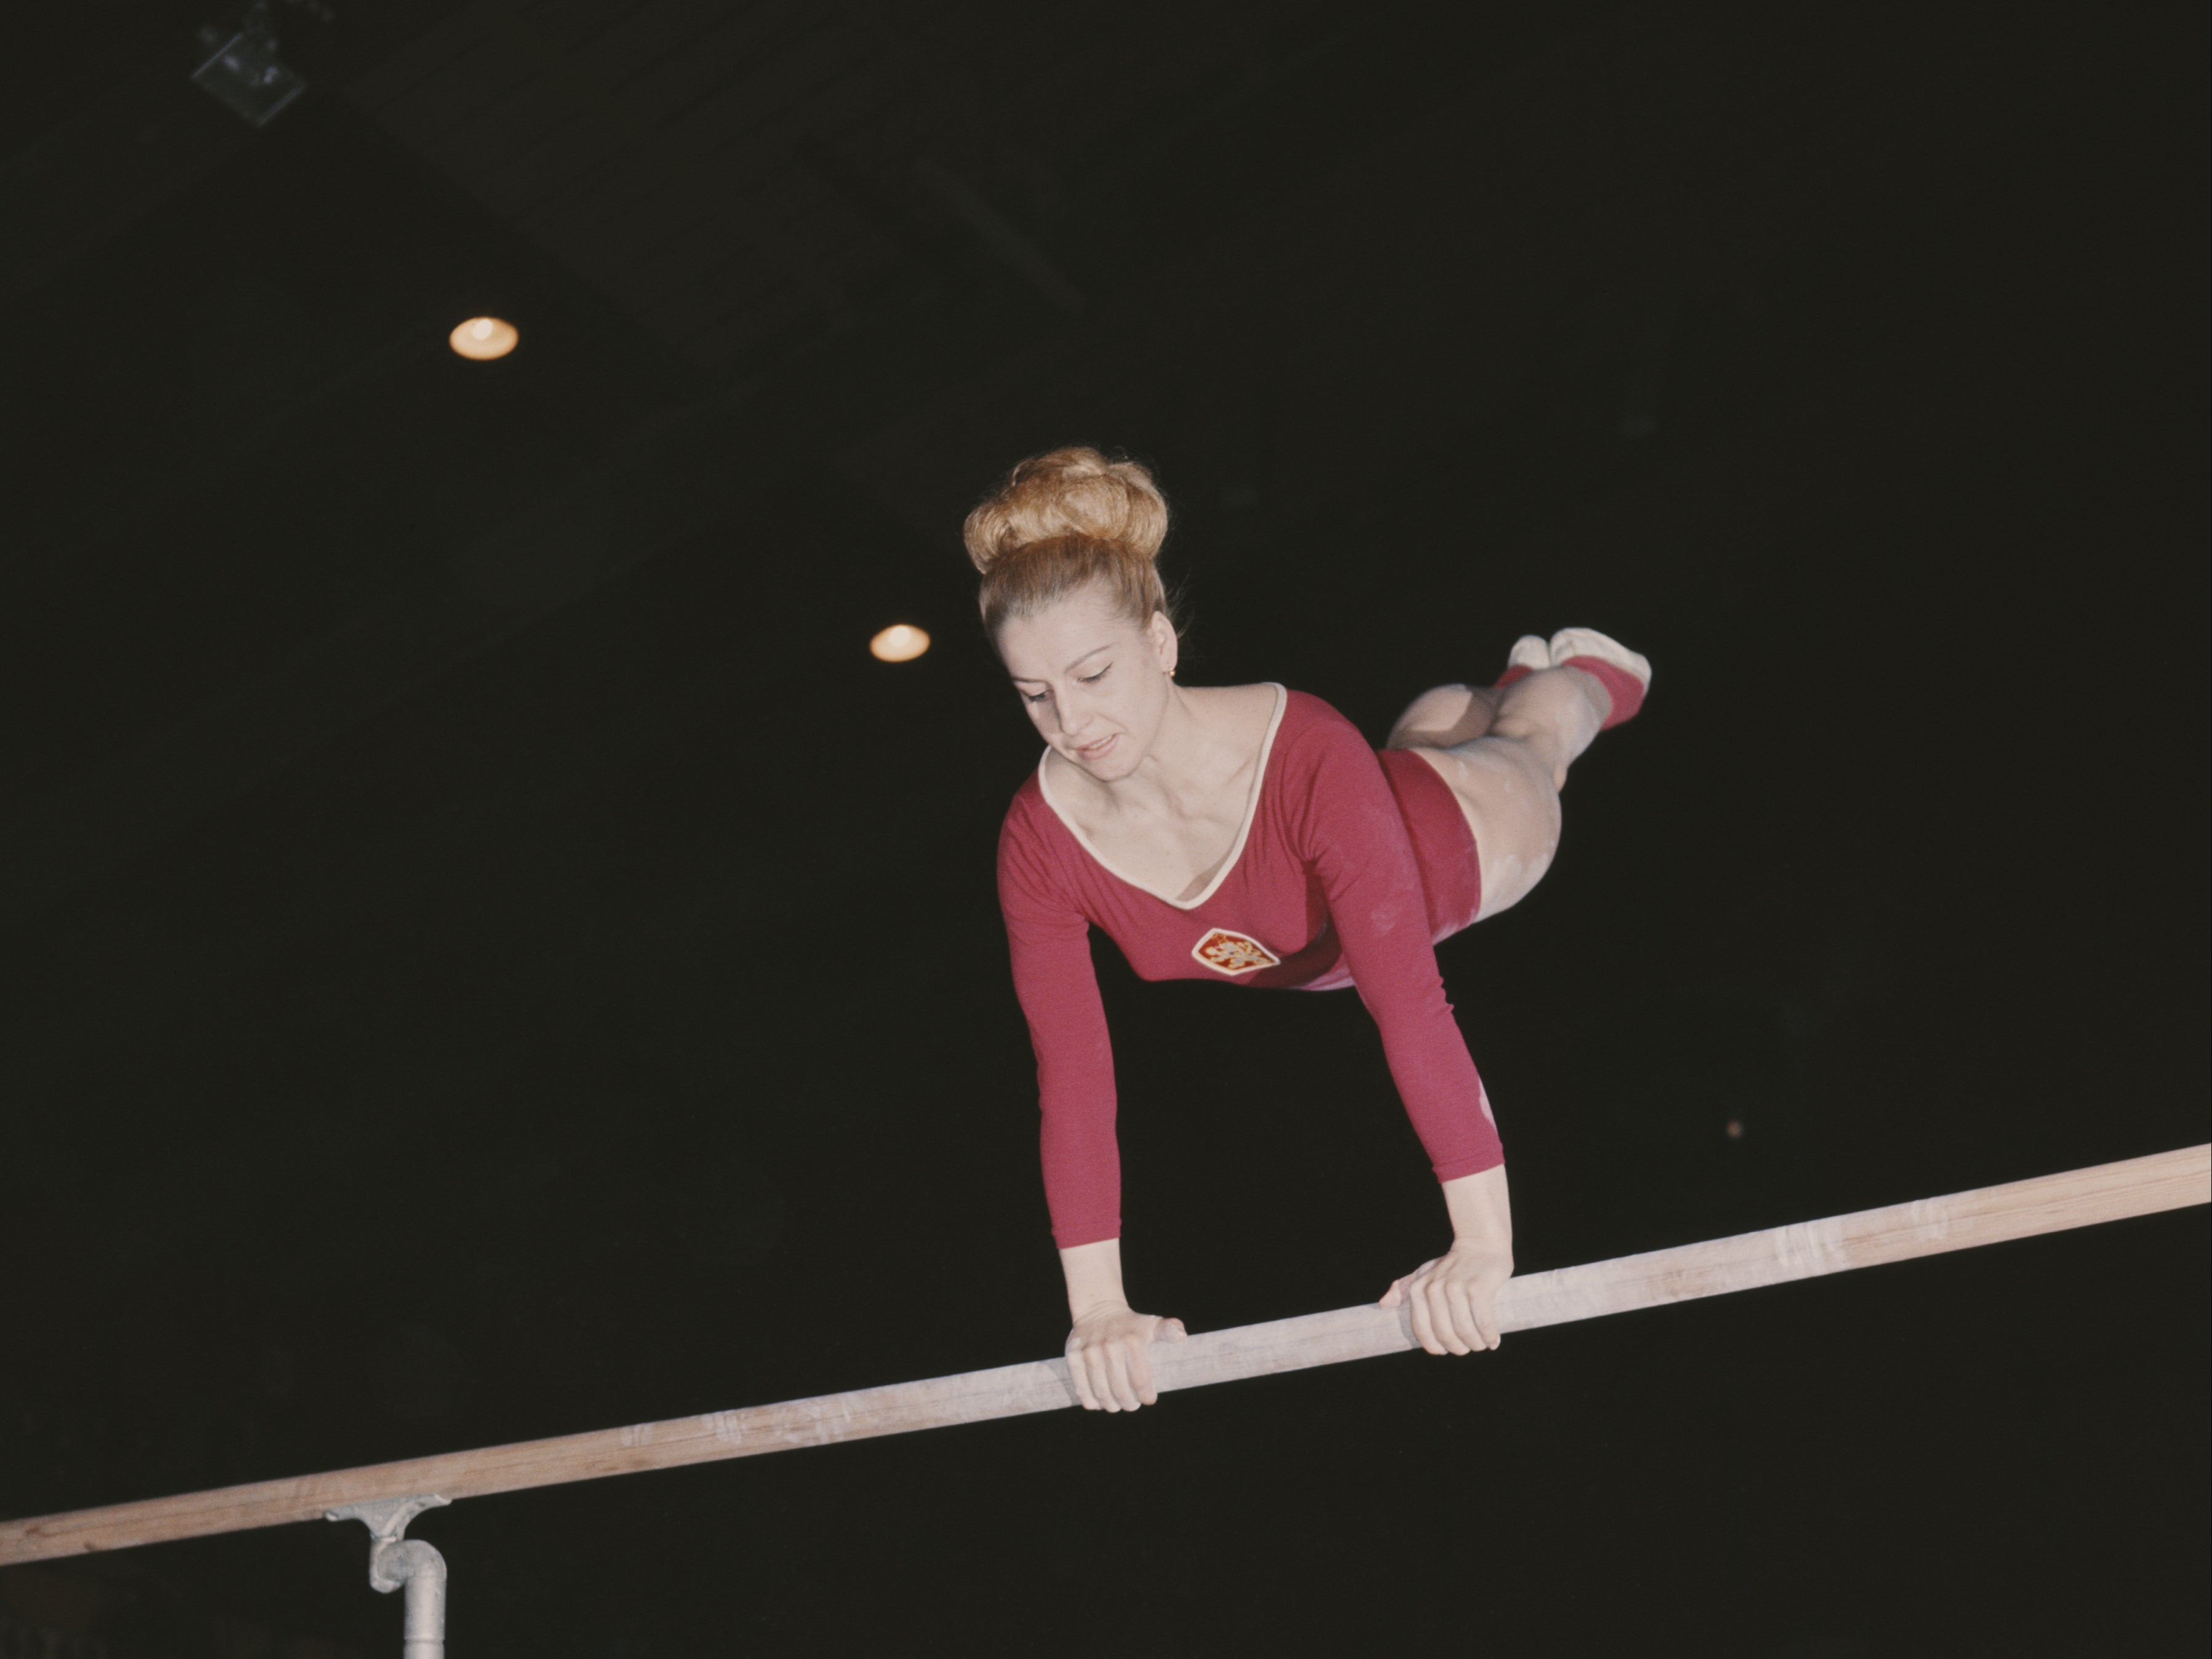 Czech gymnast and seven time Olympic Gold medallist Vera Caslavska competes on the uneven bars 1st June 1968 in London